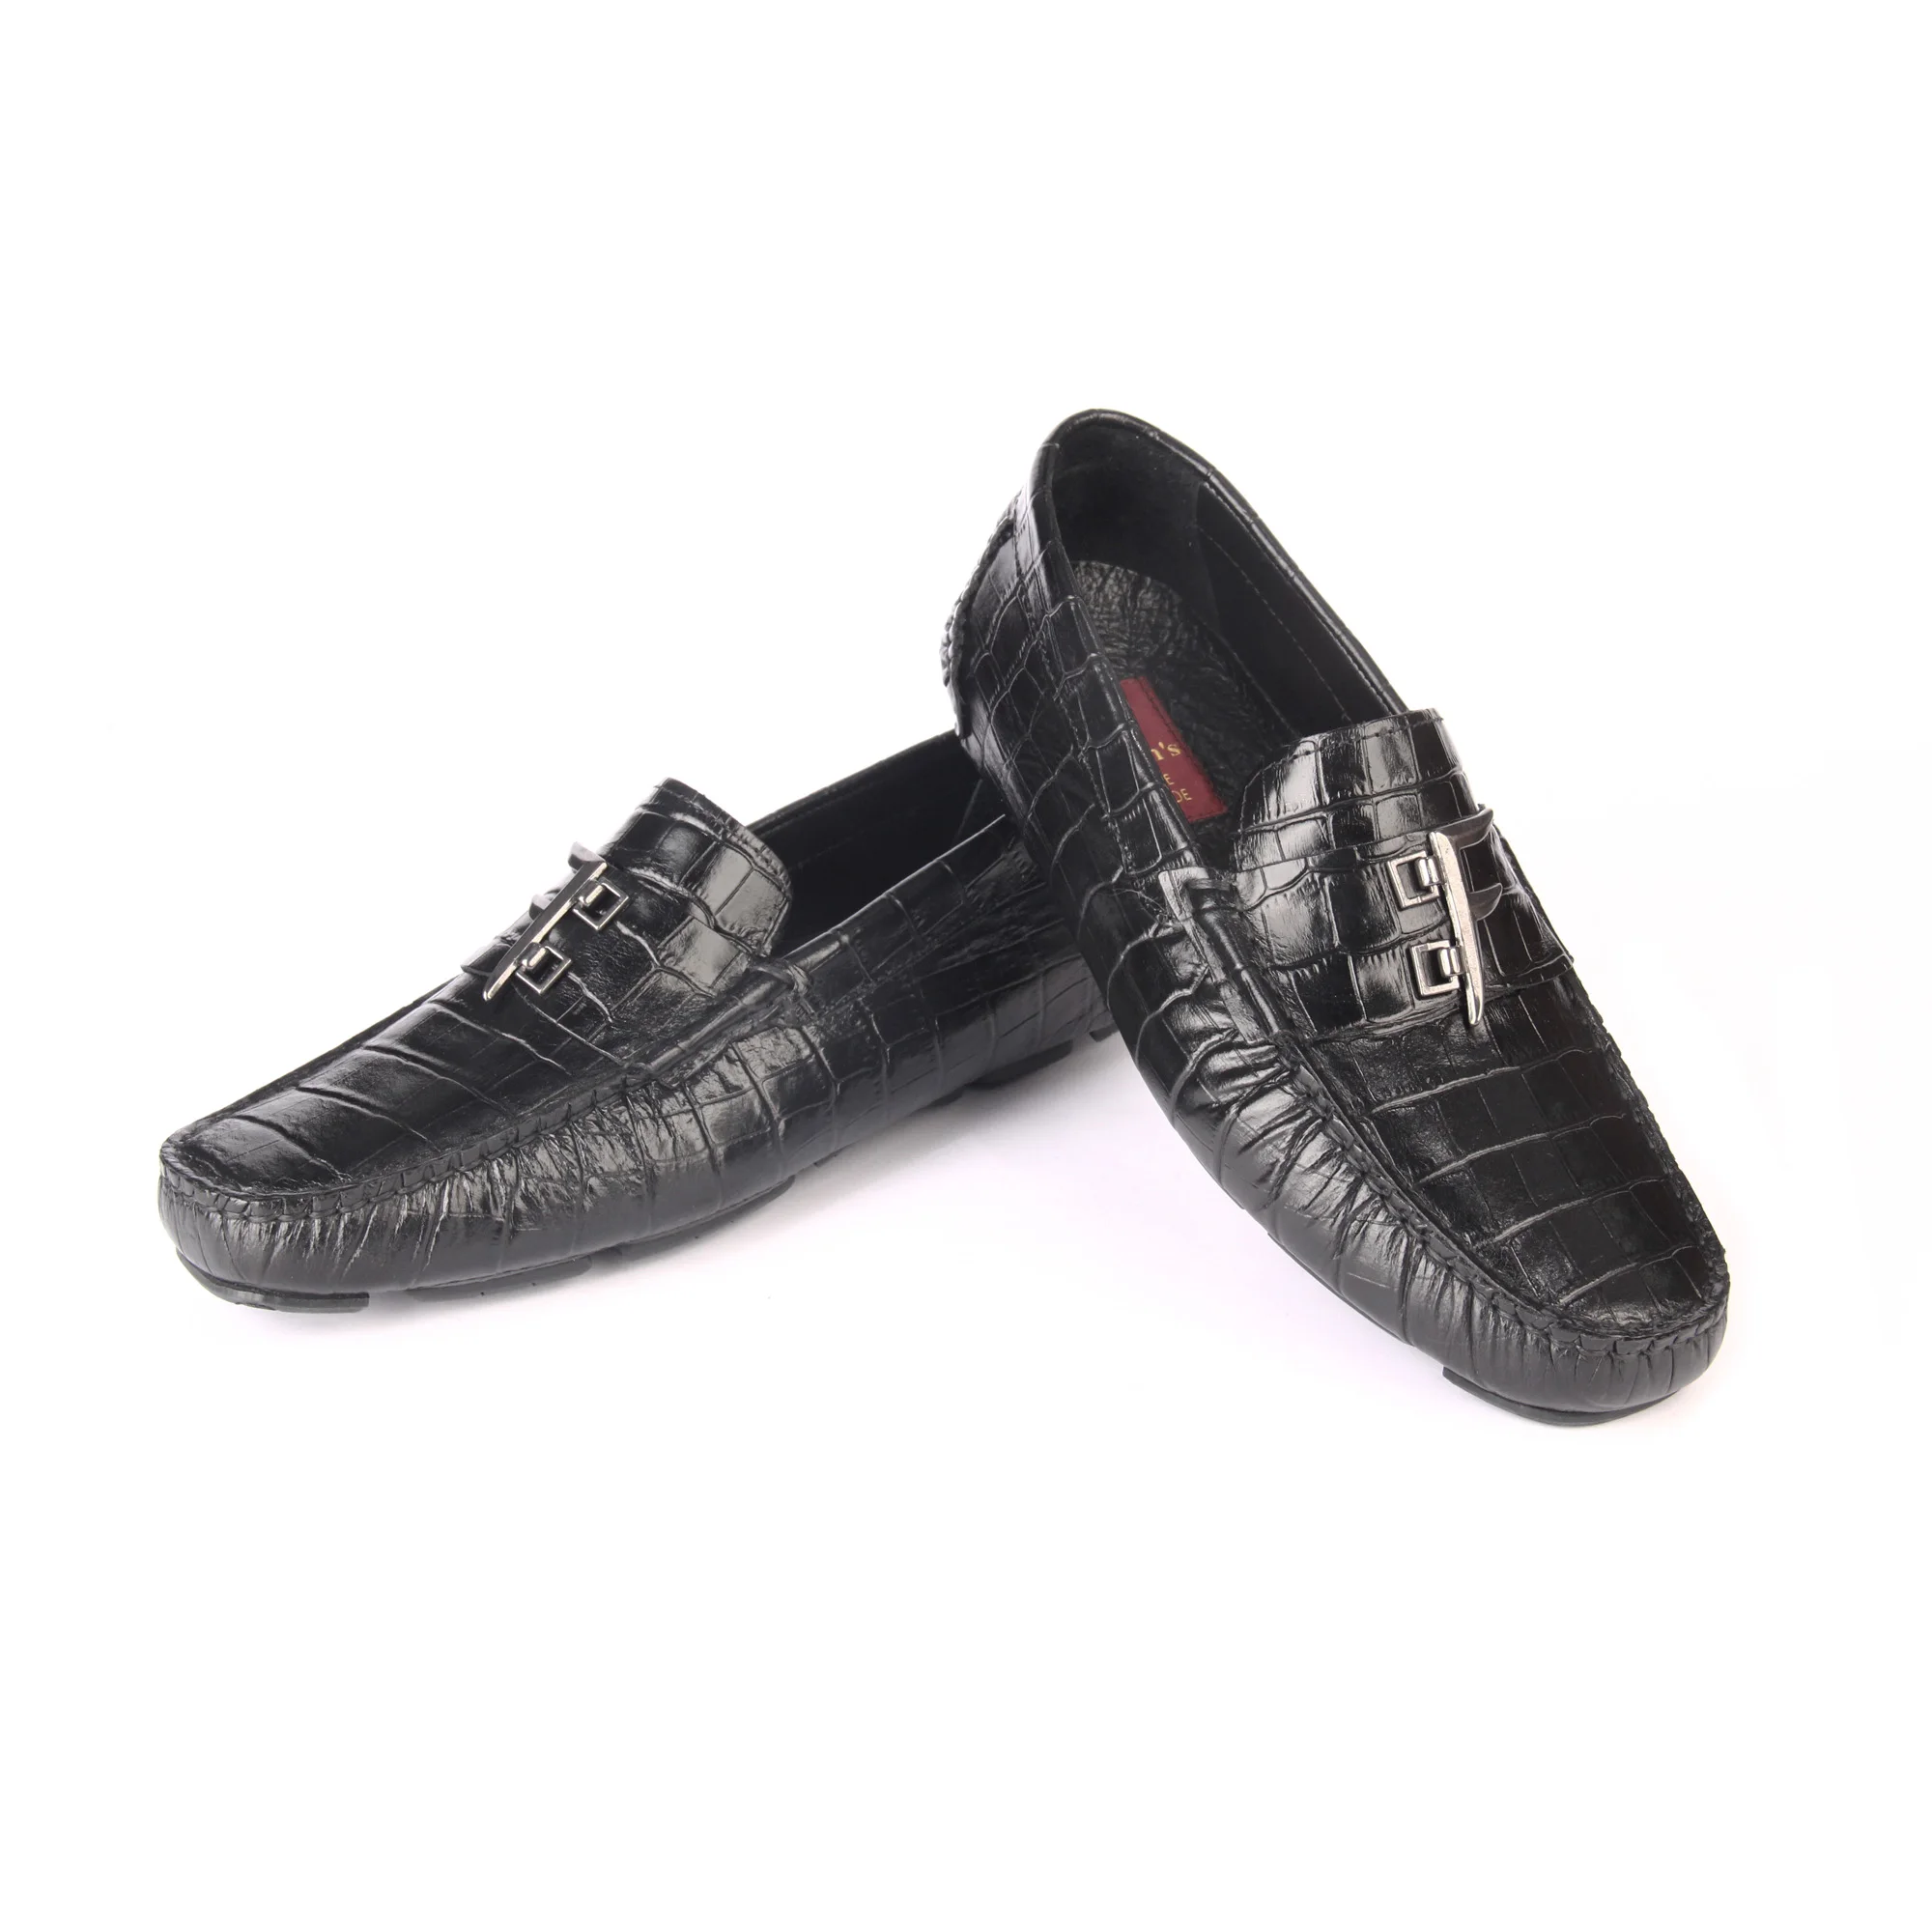 

Handmade Black Flexible Loafers with Crocodile Skin Patterned Calf Leather, Metal Logo Sign, Men's Casual Fashion Footwear 2021